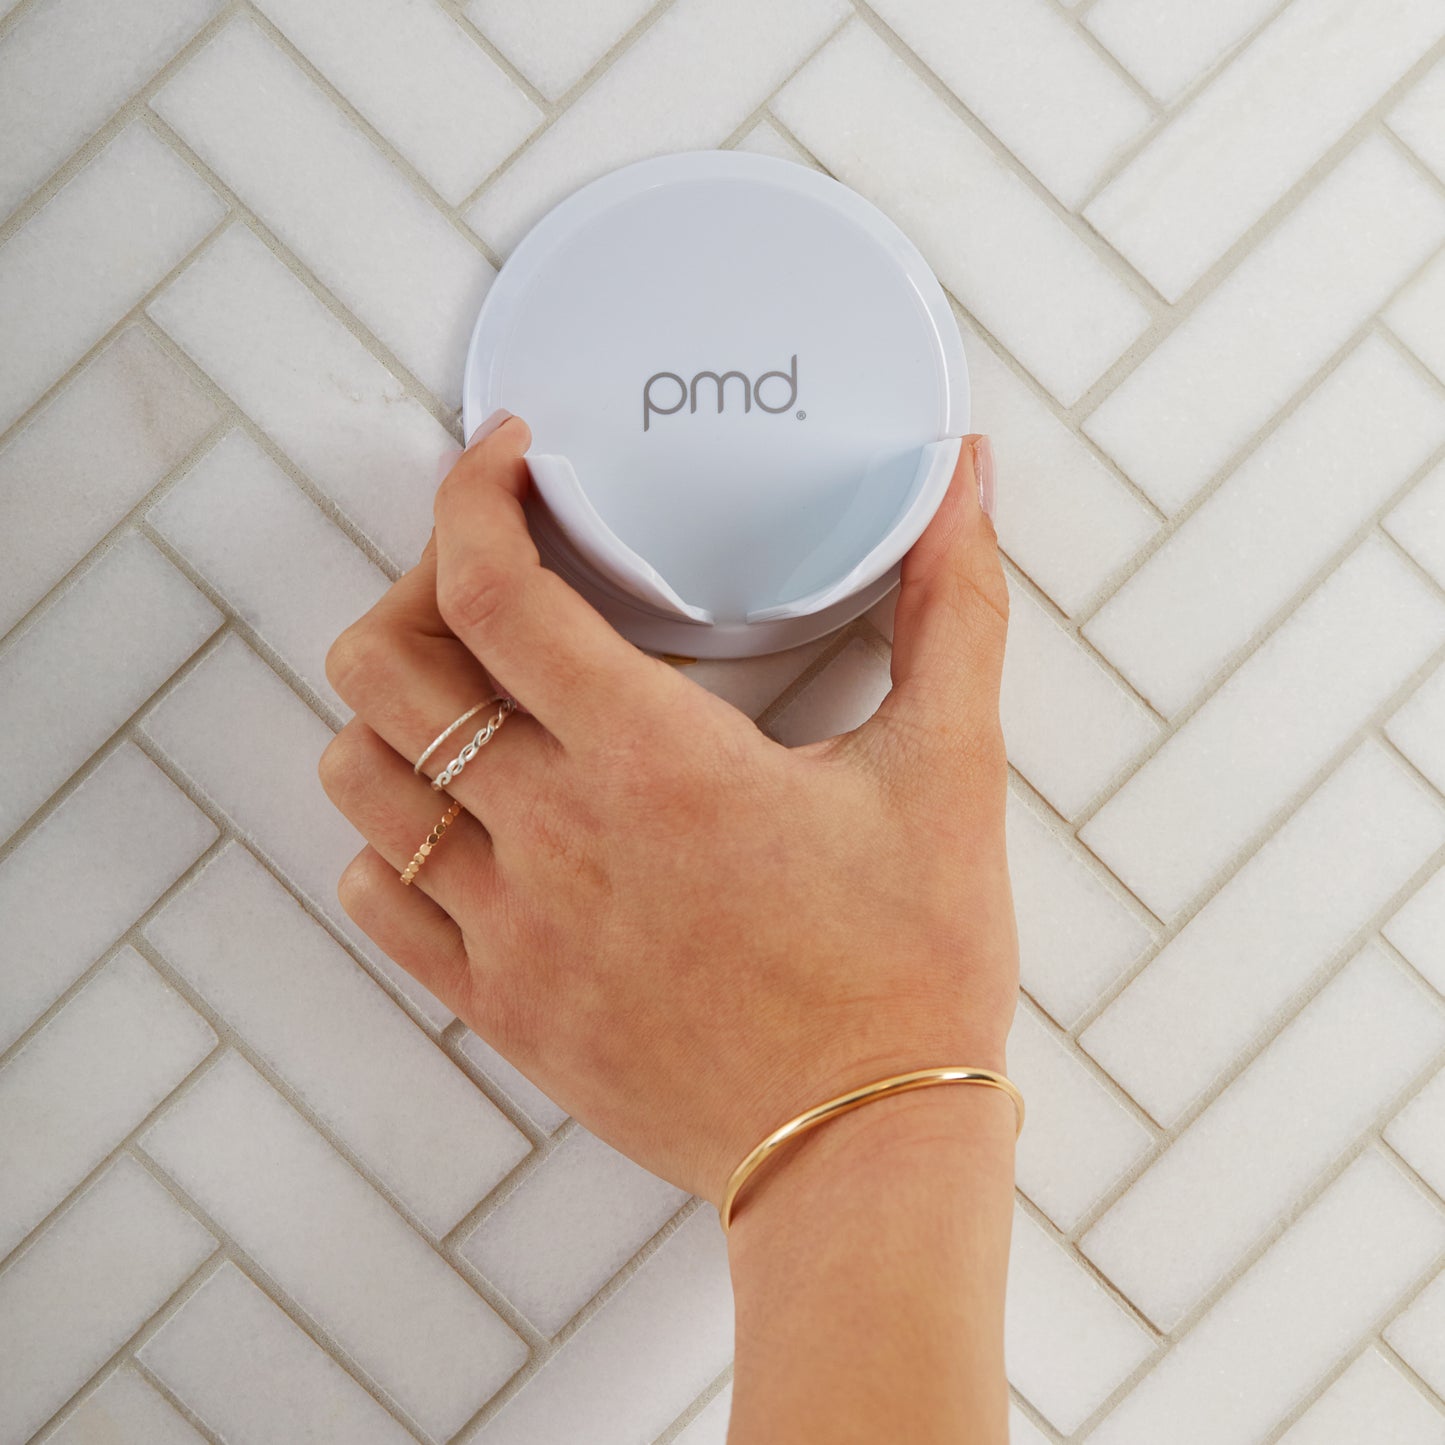 hover-image?Woman holding PMD Clean Body Shower Holder